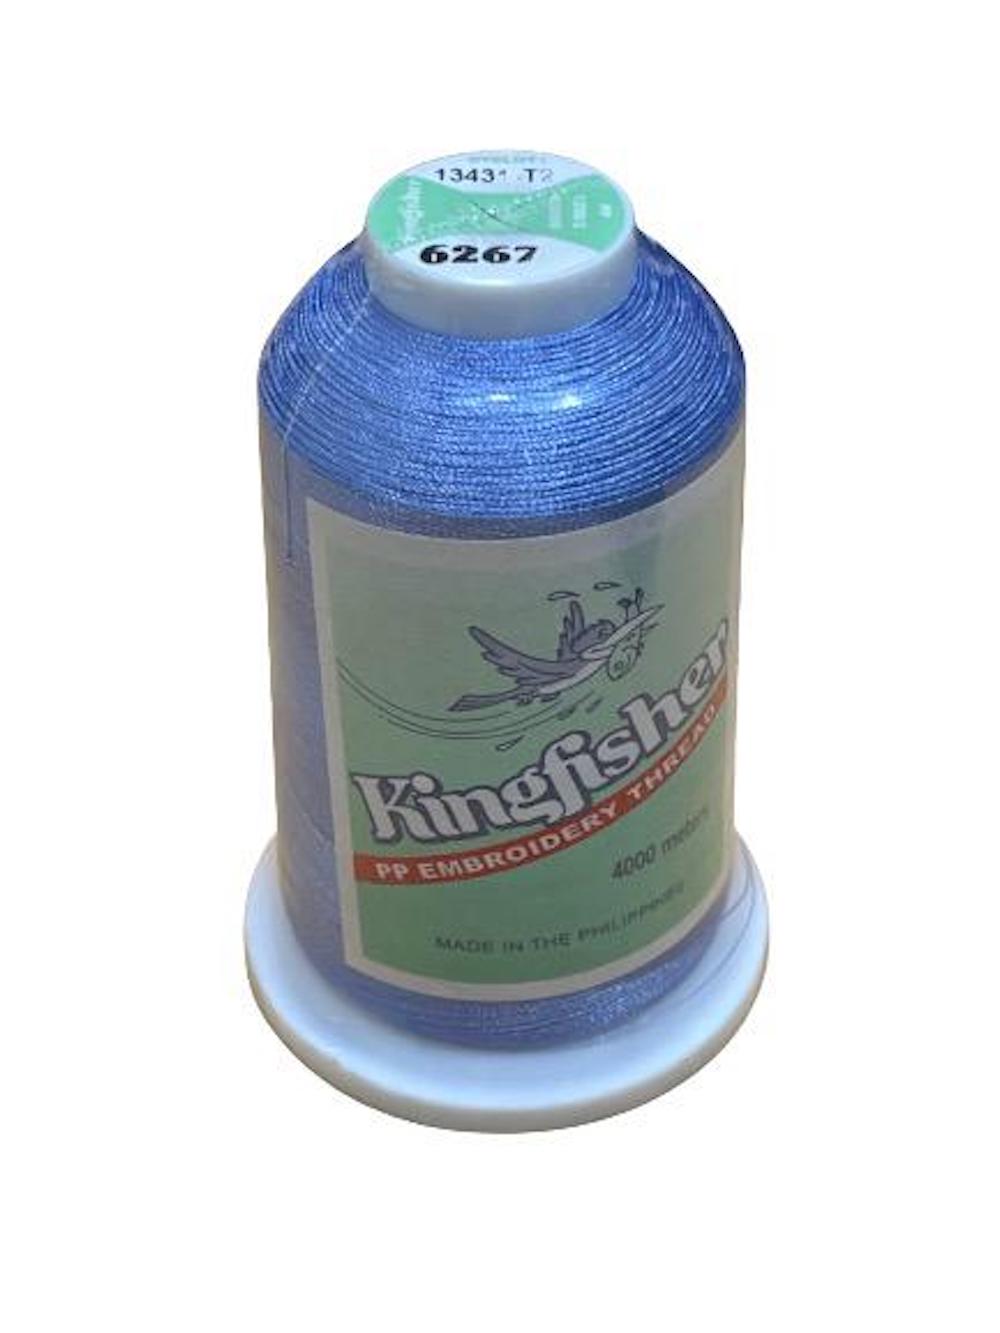 King Fisher Embroidery Thread 4000m 6267 - MY SEWING MALL